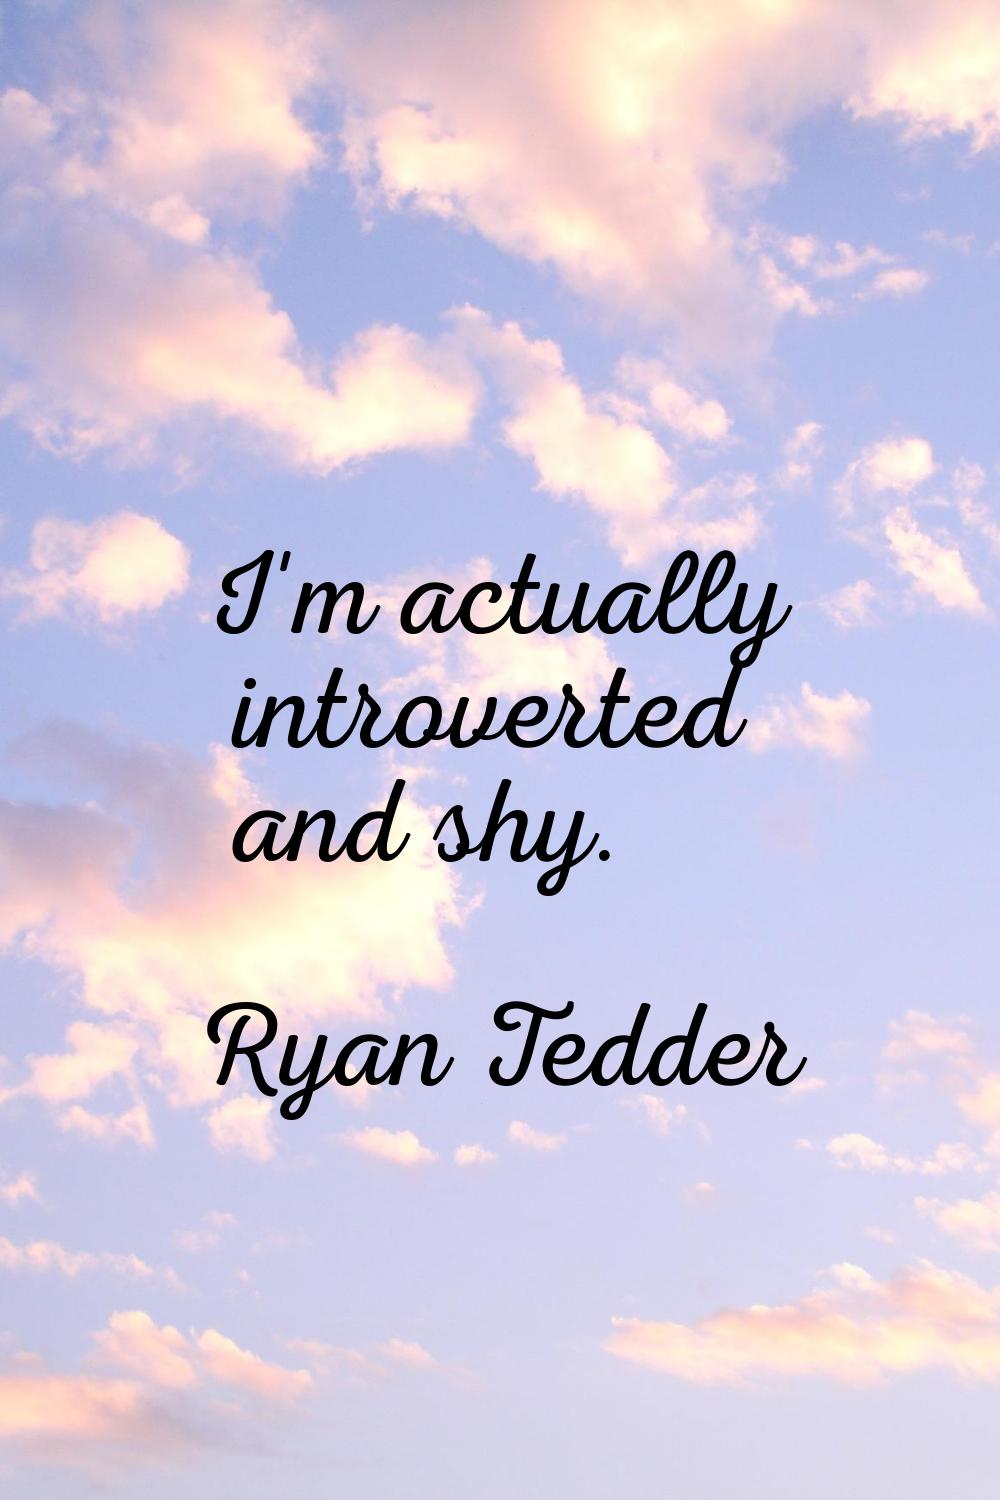 I'm actually introverted and shy.